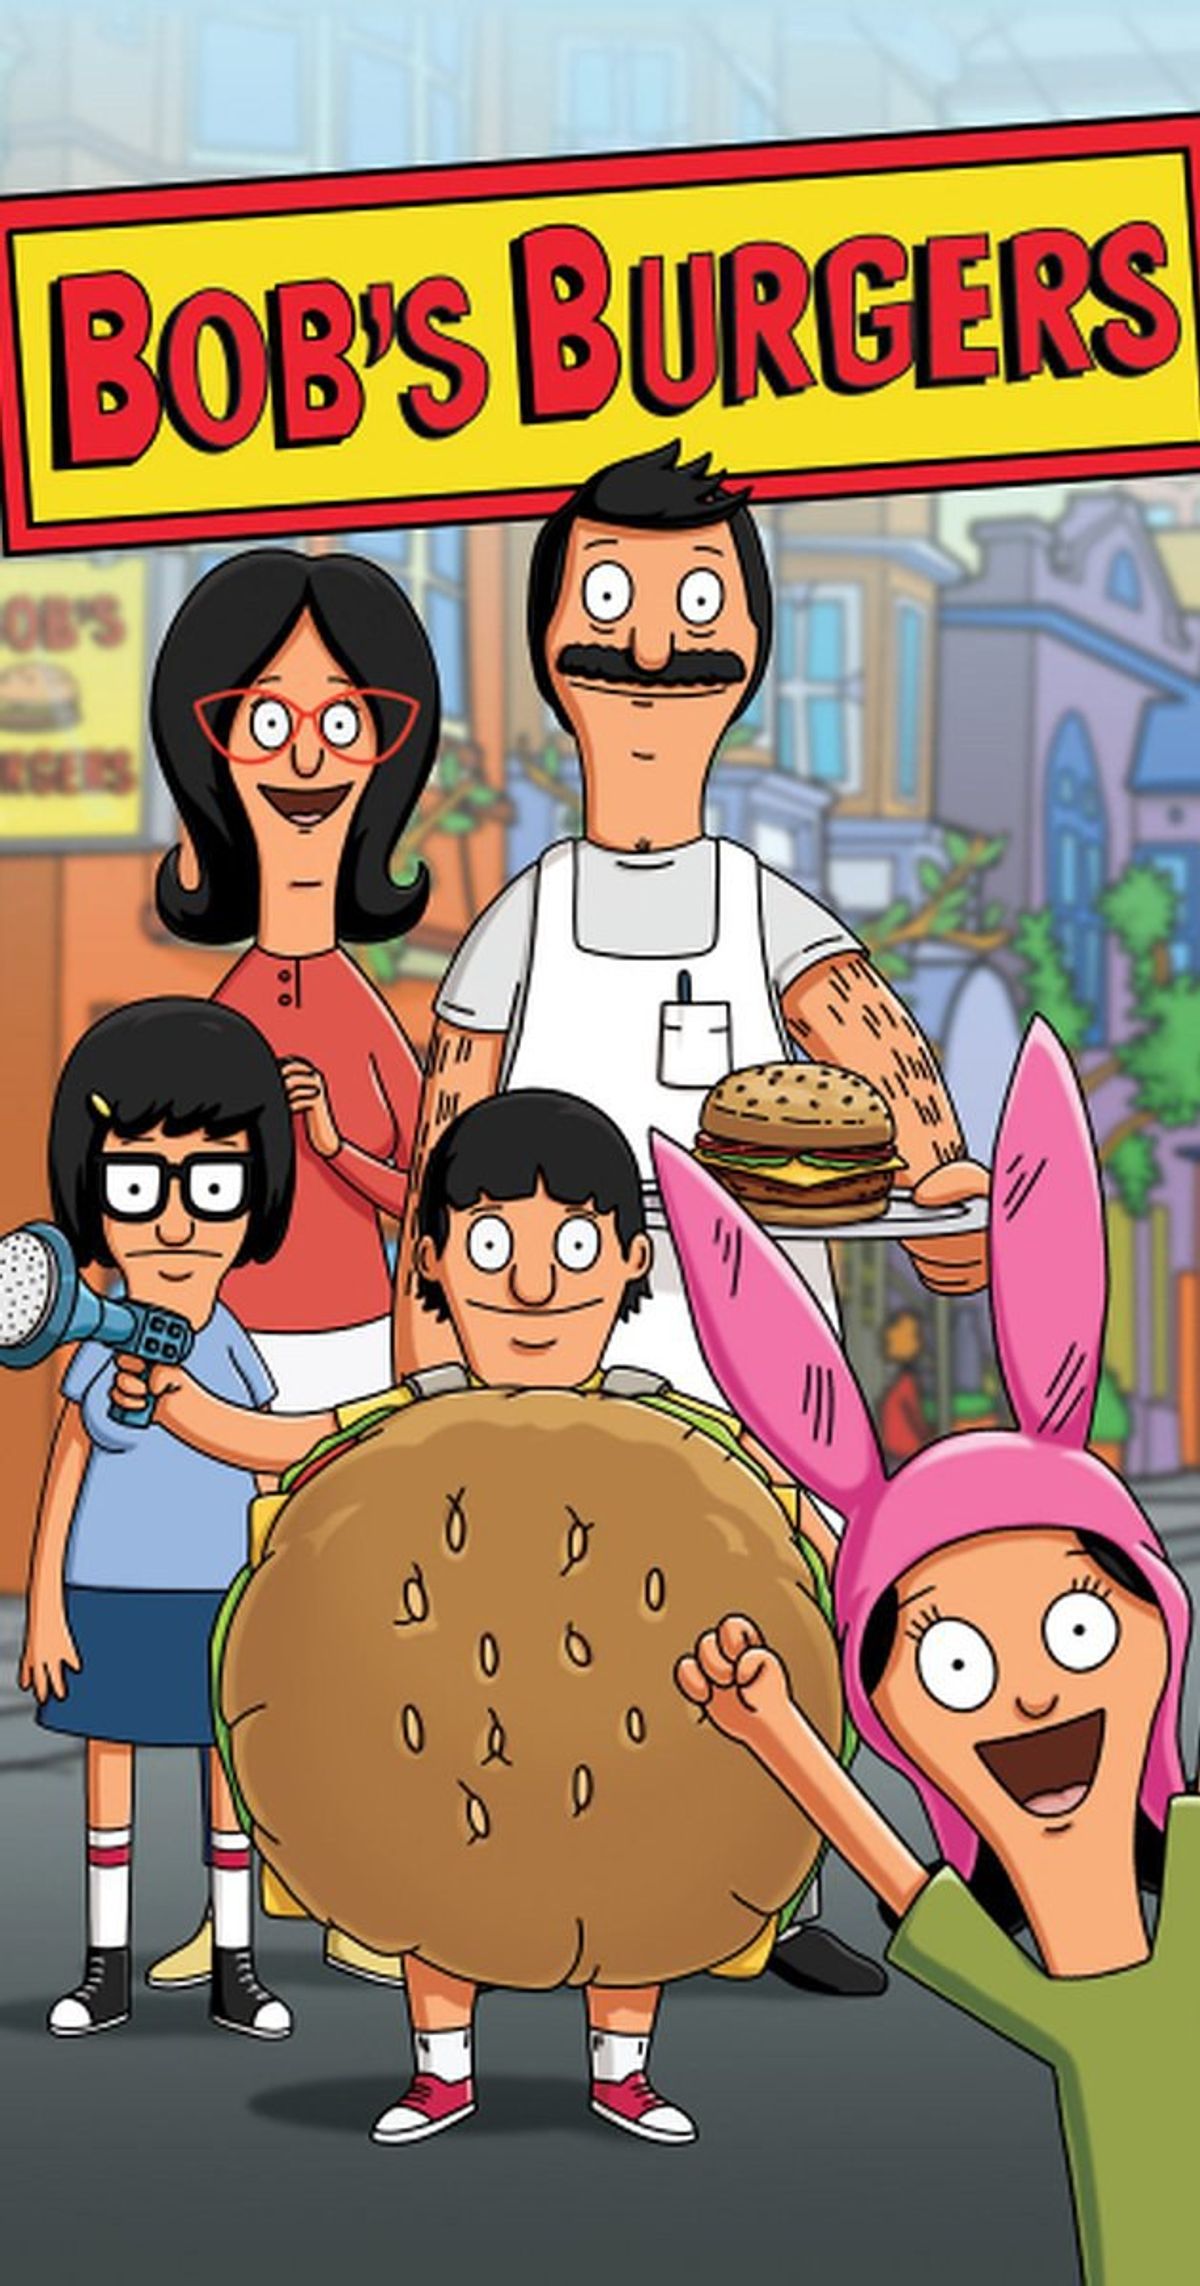 Sorority Recruitment As Told By Bob's Burgers